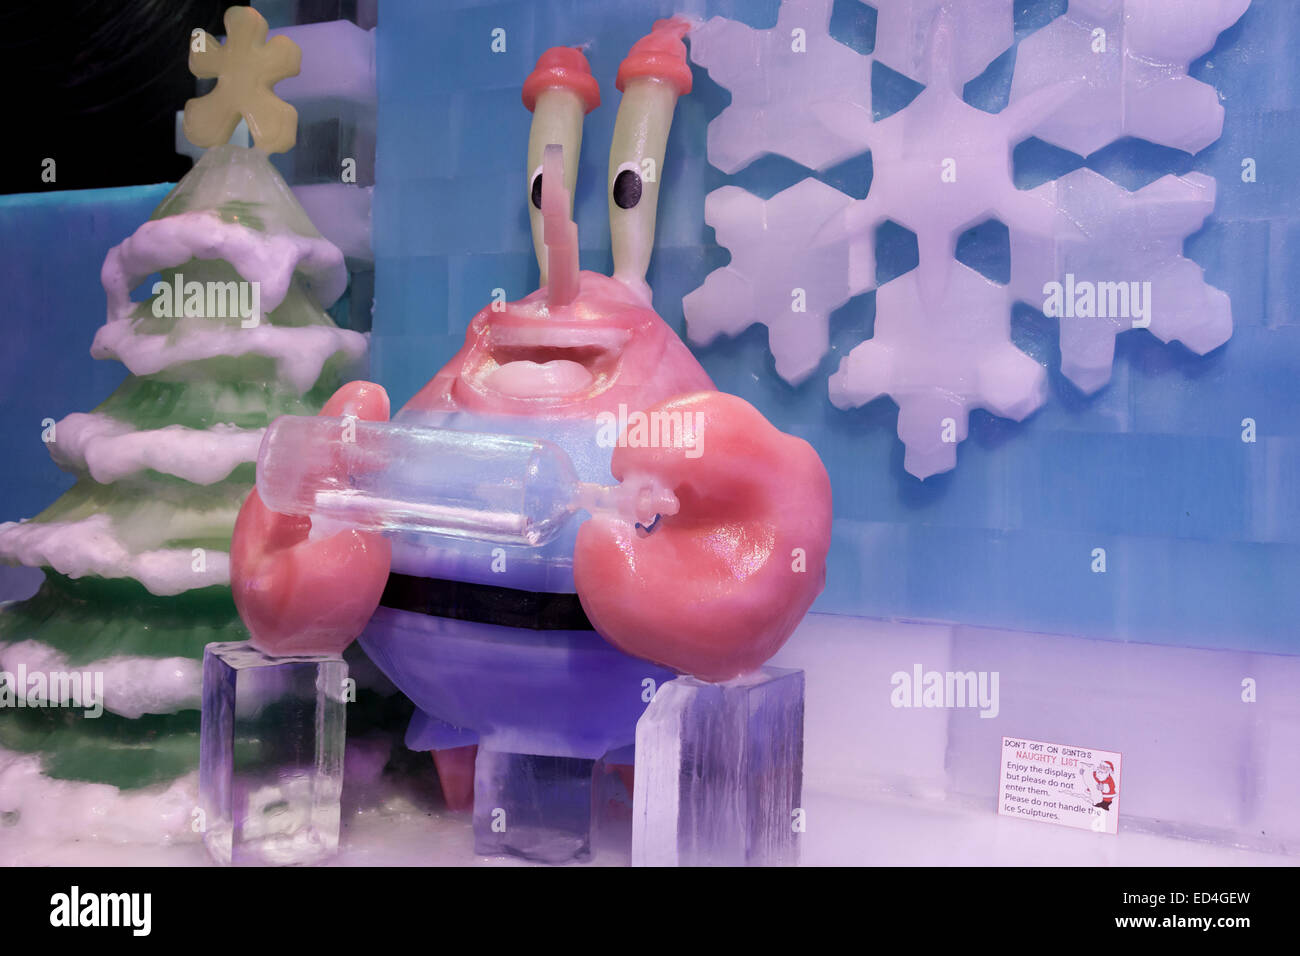 Ice Land 9 degrees attraction at Christmas at Moody Gardens. Amazing display of ice sculptures with children's Spongebob story. Stock Photo